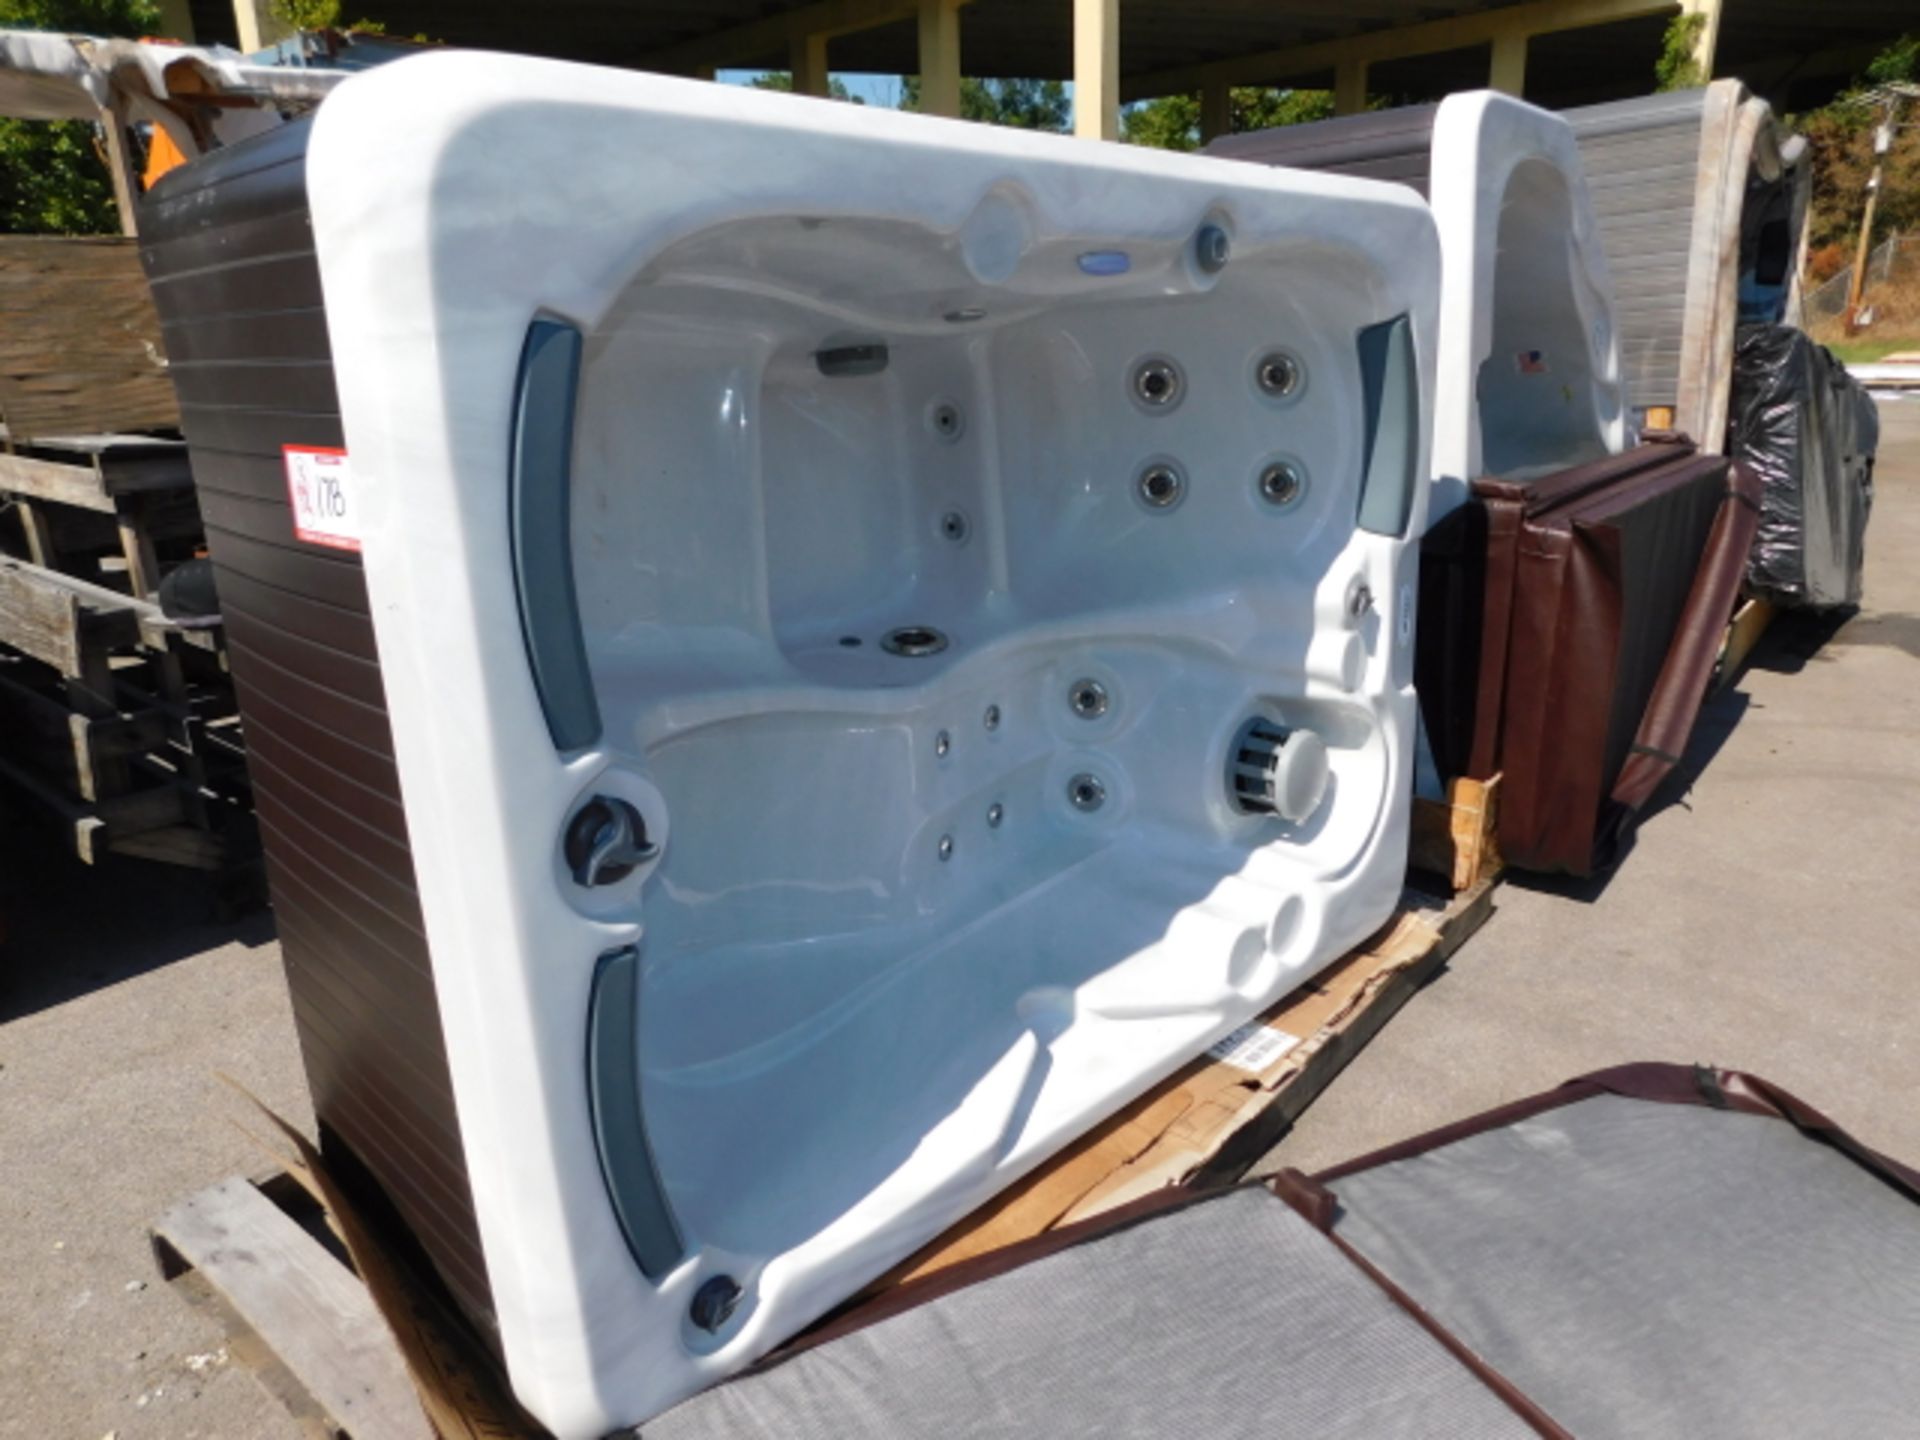 Hudson Bay HG38 - 3 person hot tub with 1 lounger (minor cosmetic and frame damage)